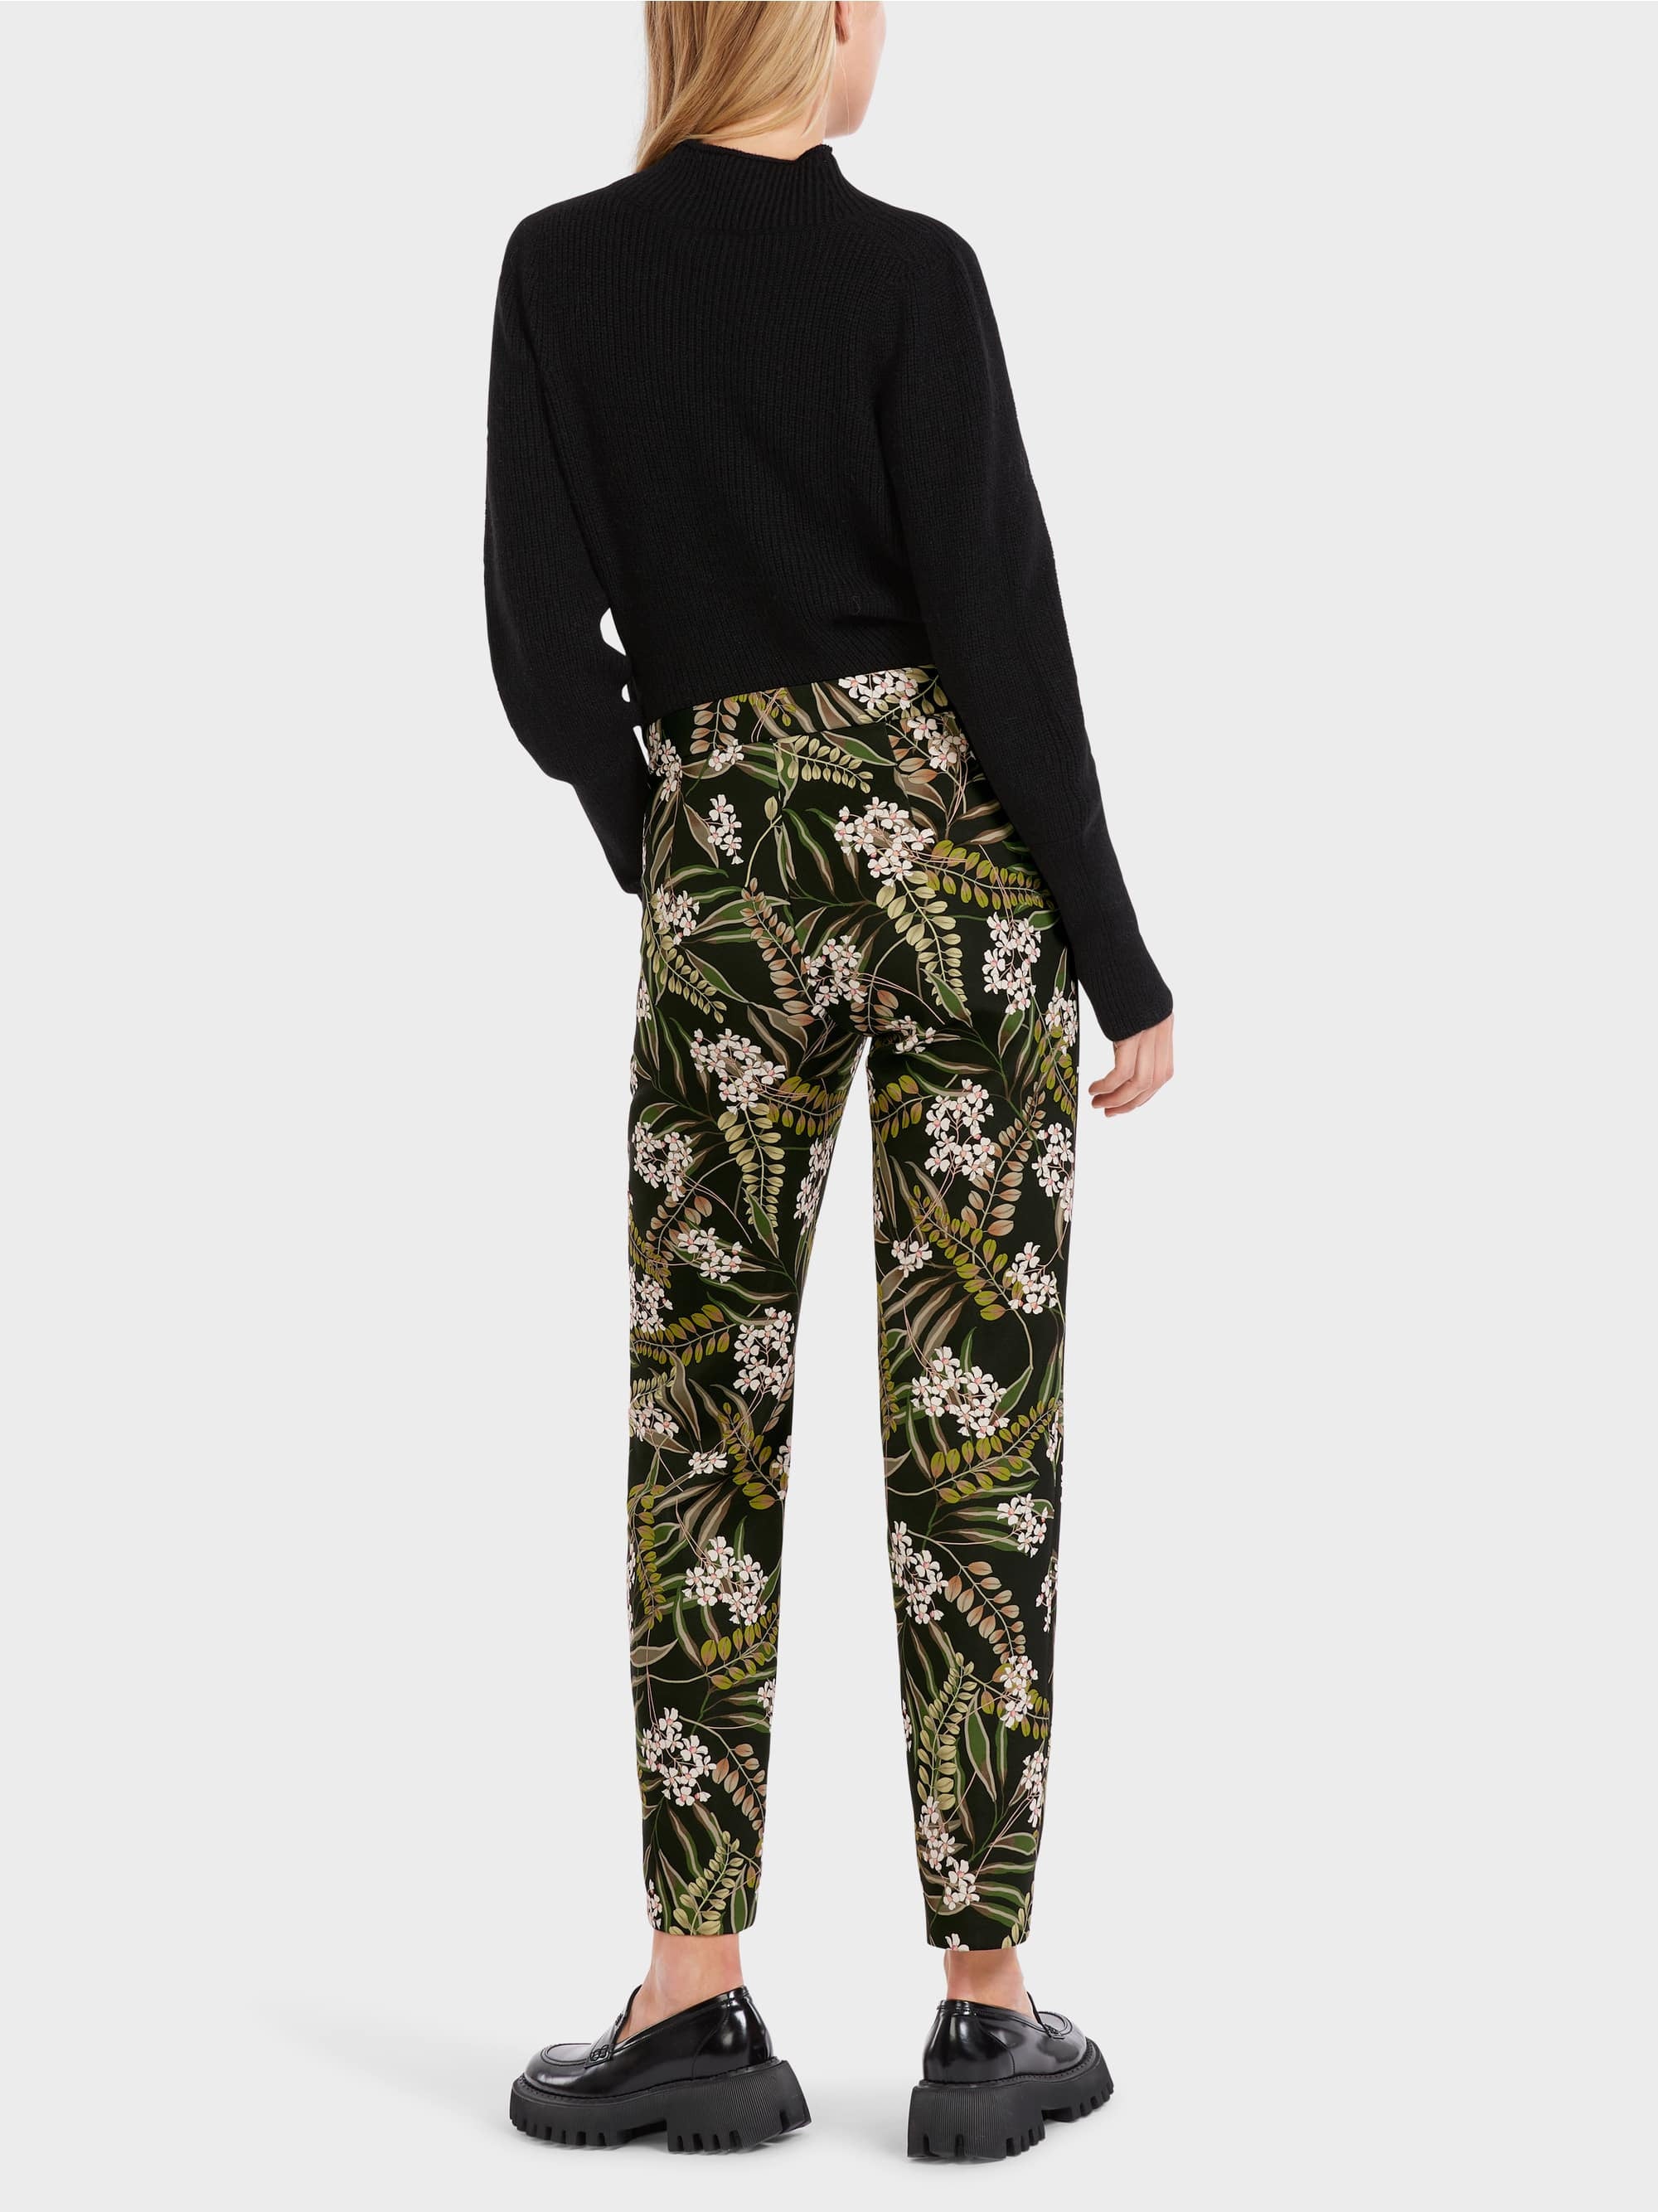 Fordon Jersey Pants With All-Over Print_VC 81.63 J37_900_02